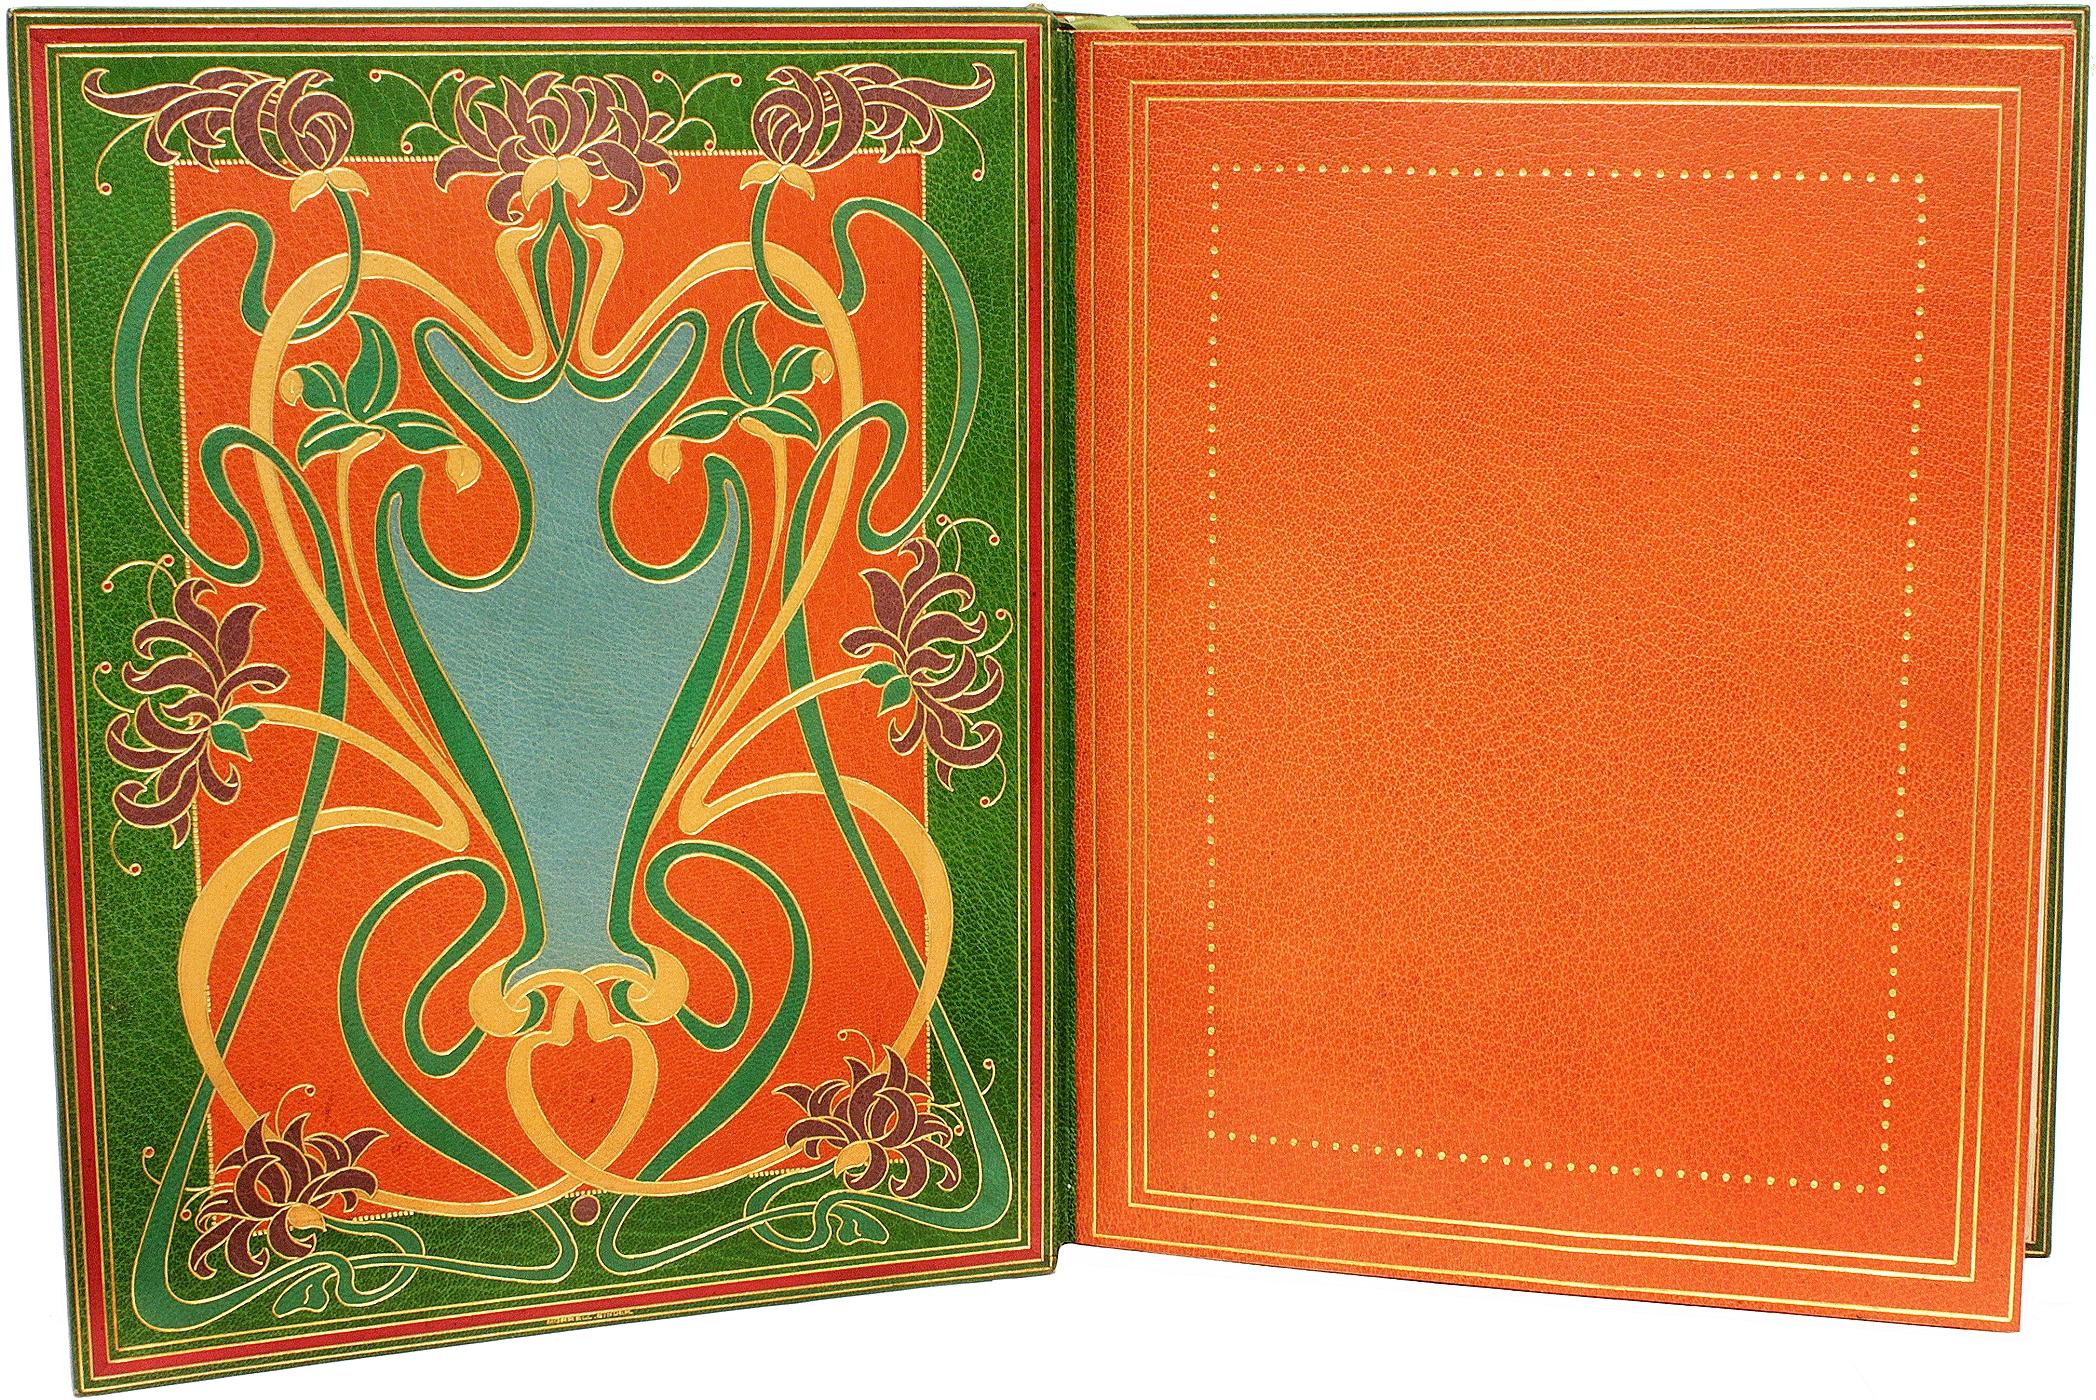 AUTHOR: CRUIKSHANK, George (introduction by Joseph Grego)

TITLE: Cruikshank's Water Colours.

PUBLISHER: London: A. & C. Black, 1903.

DESCRIPTION: EDITION-DE-LUXE IN EXTRAORDINARILY LAVISH MORRELL PICTORIAL BINDING. 4to., 10-9/16 x 8-5/8, limited